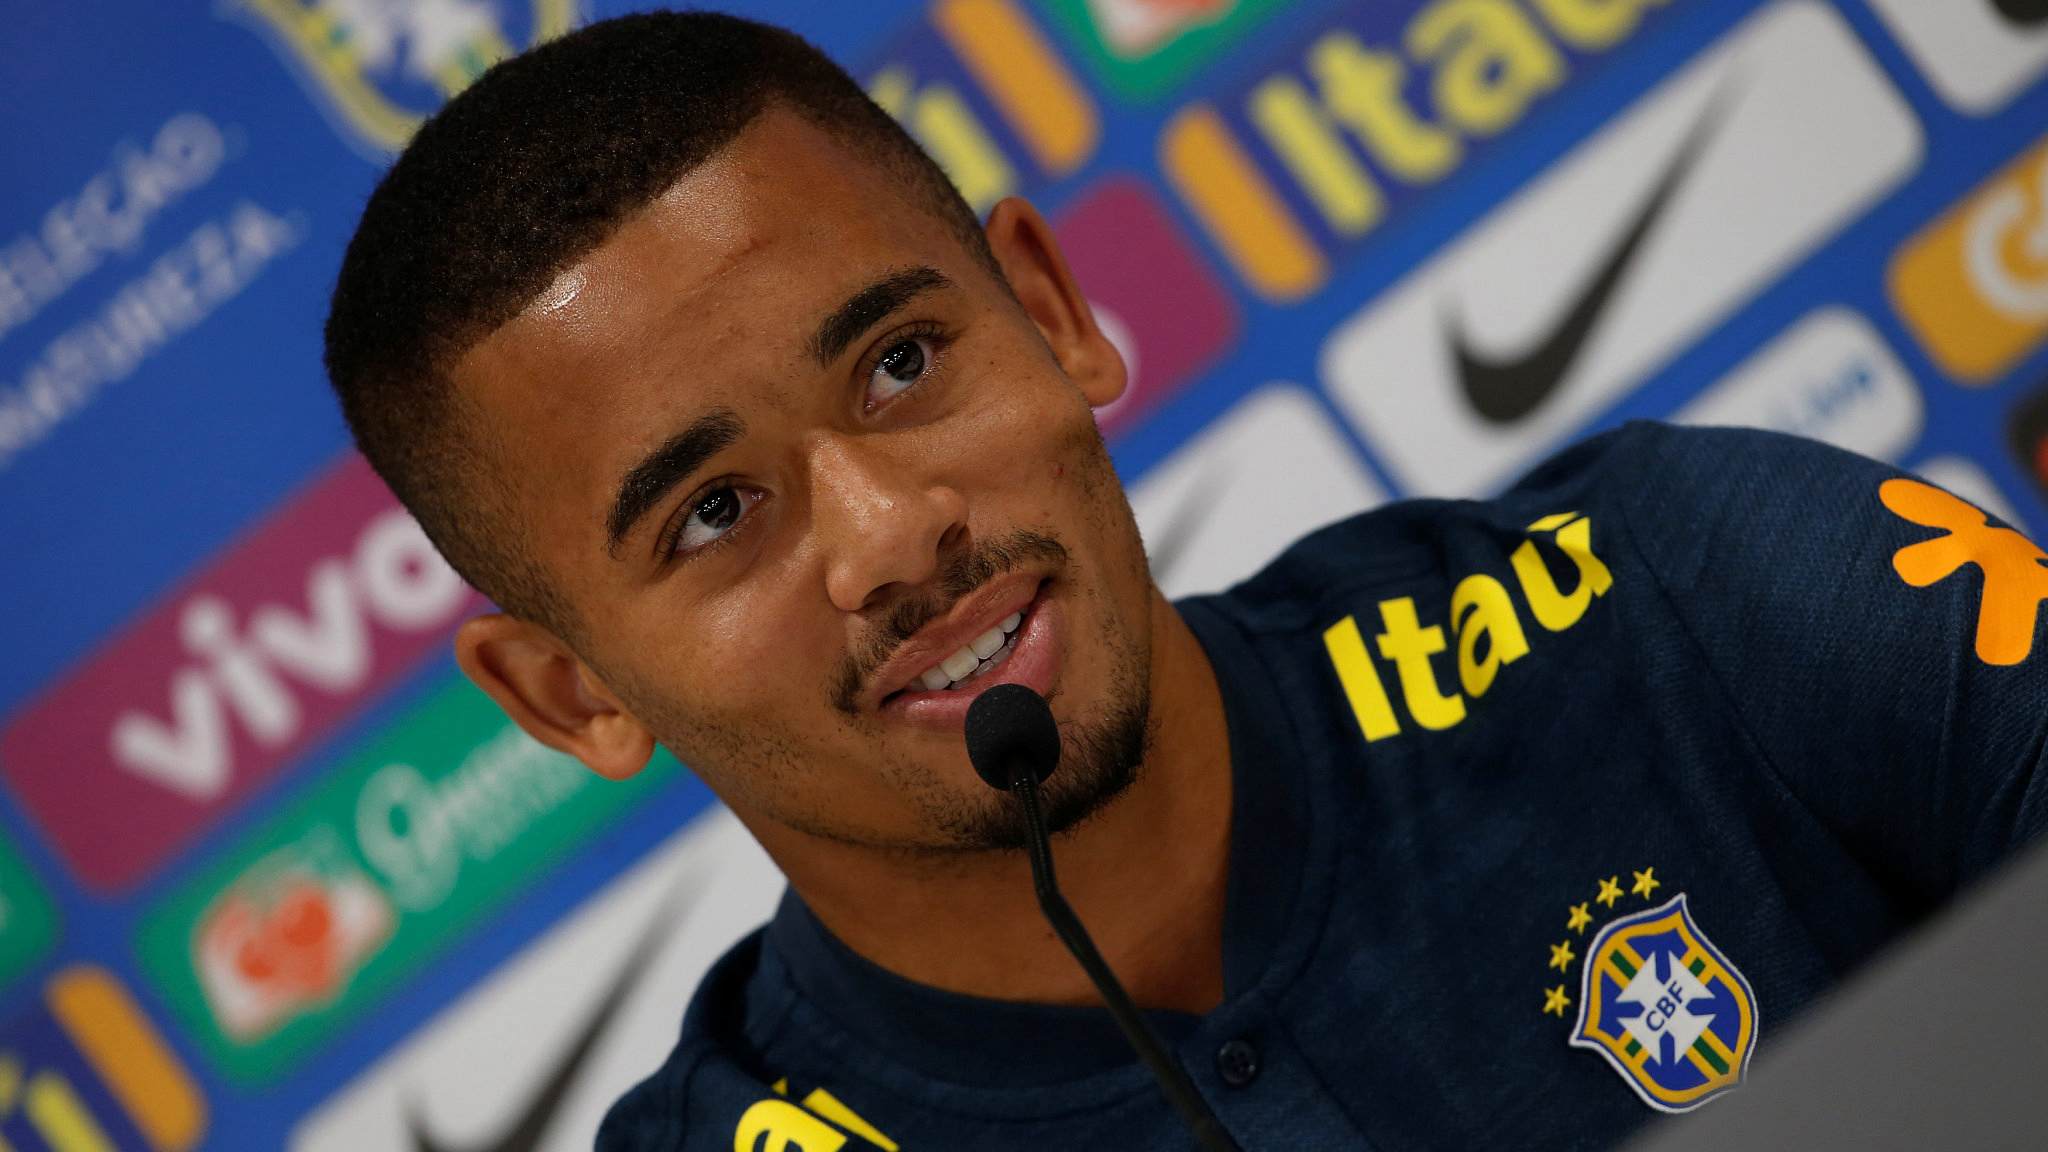 The fixtures Arsenal striker Gabriel Jesus could miss after knee surgery  including Newcastle Tottenham and Manchester United with Brazilian facing  up to three months on the sidelines  talkSPORT